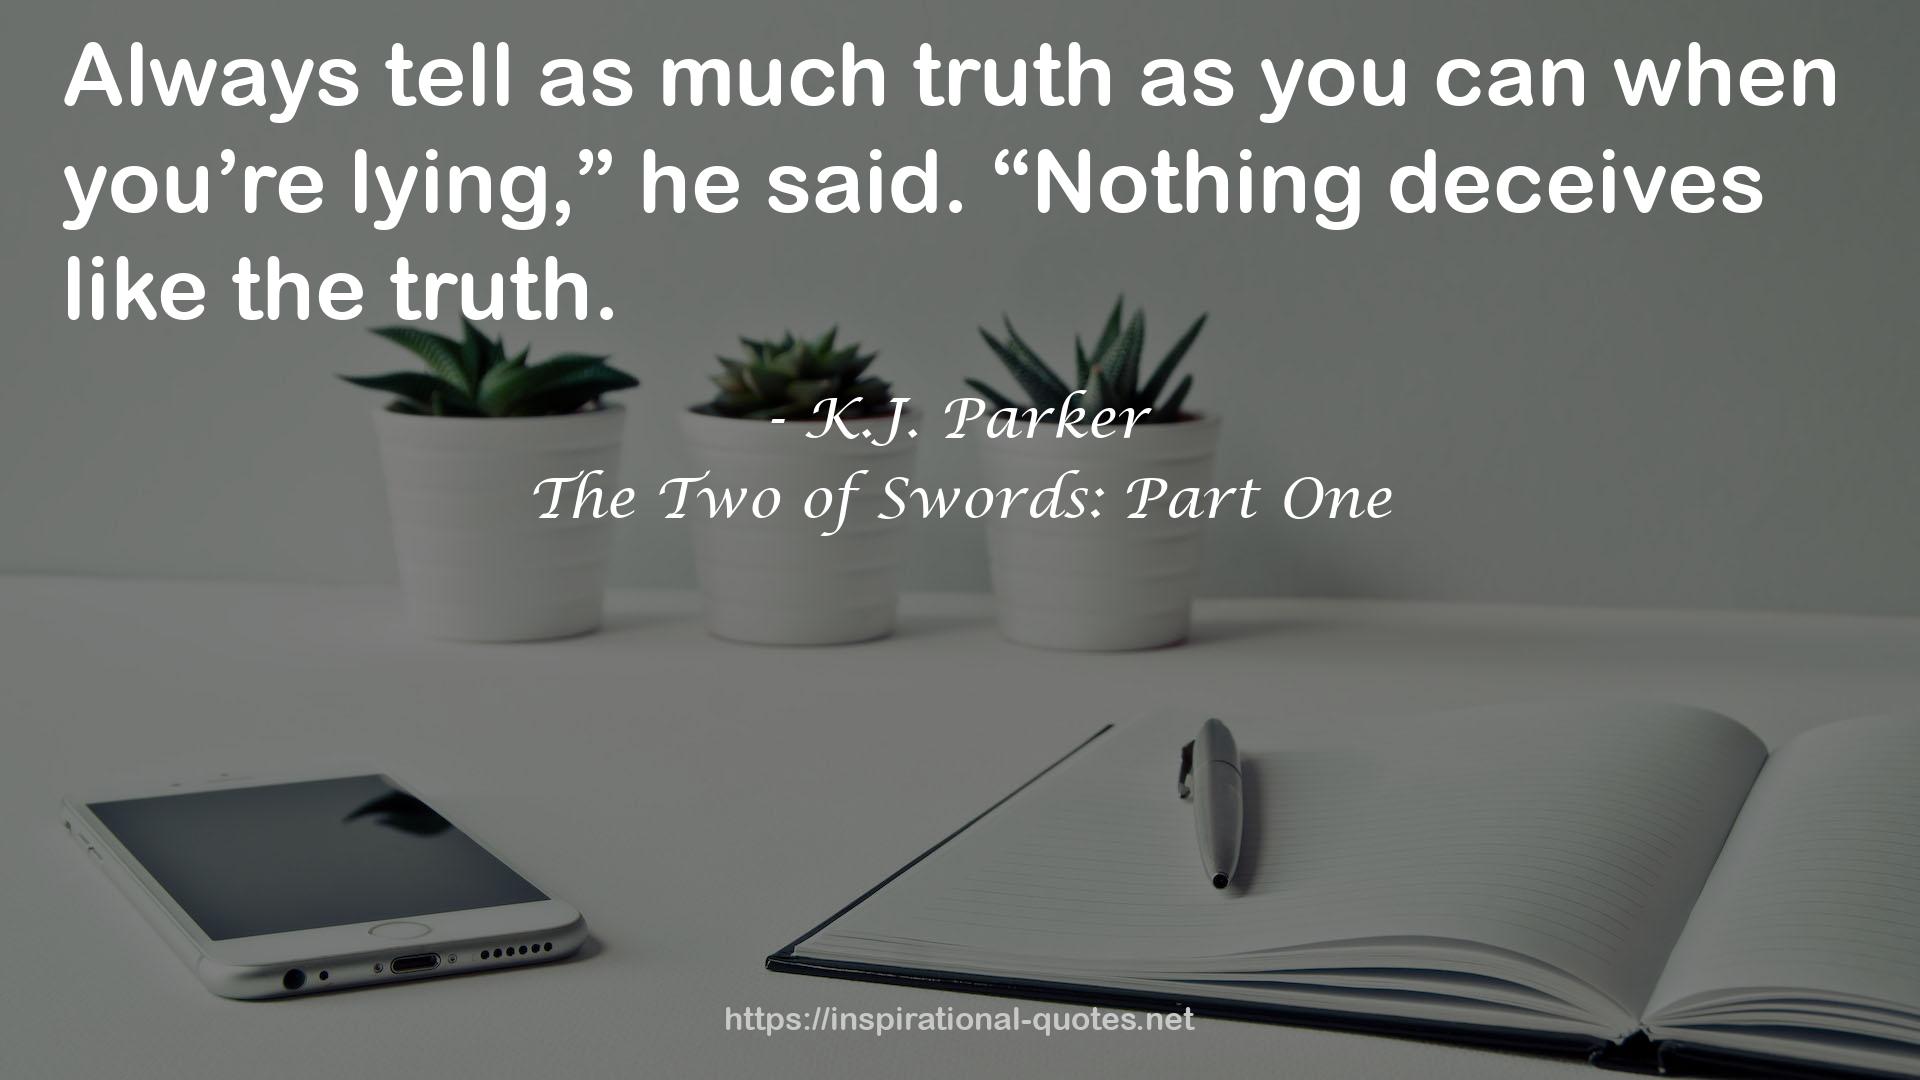 The Two of Swords: Part One QUOTES